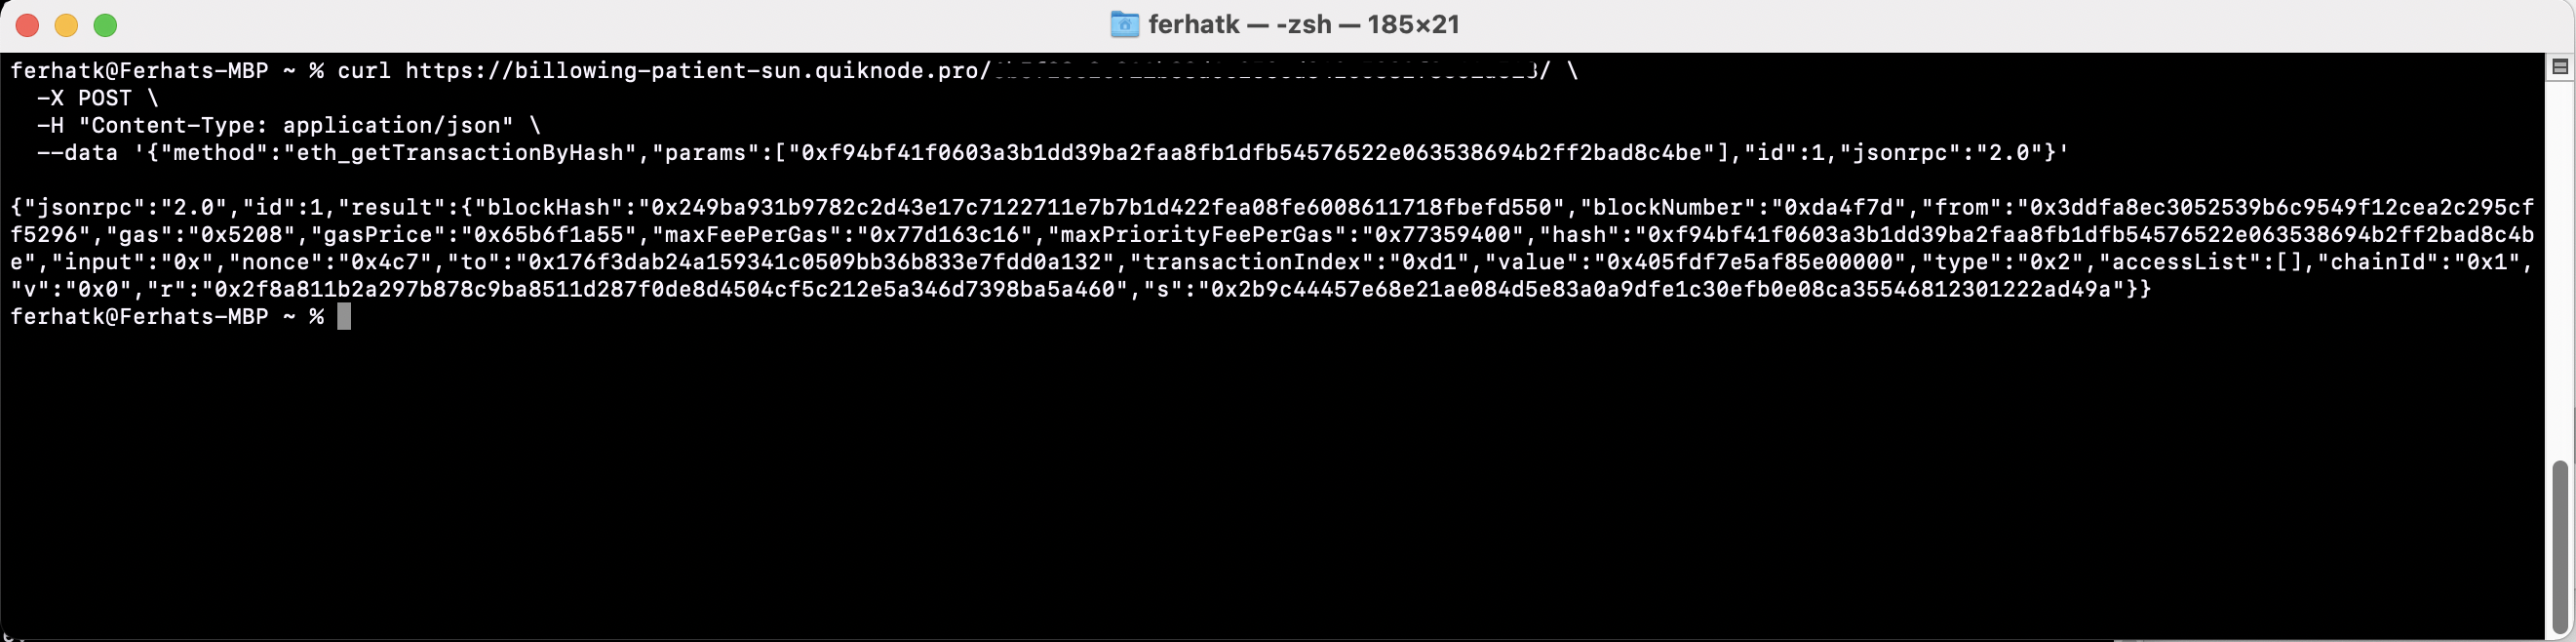 Image of terminal containing curl command for eth_getTransactionByHash method